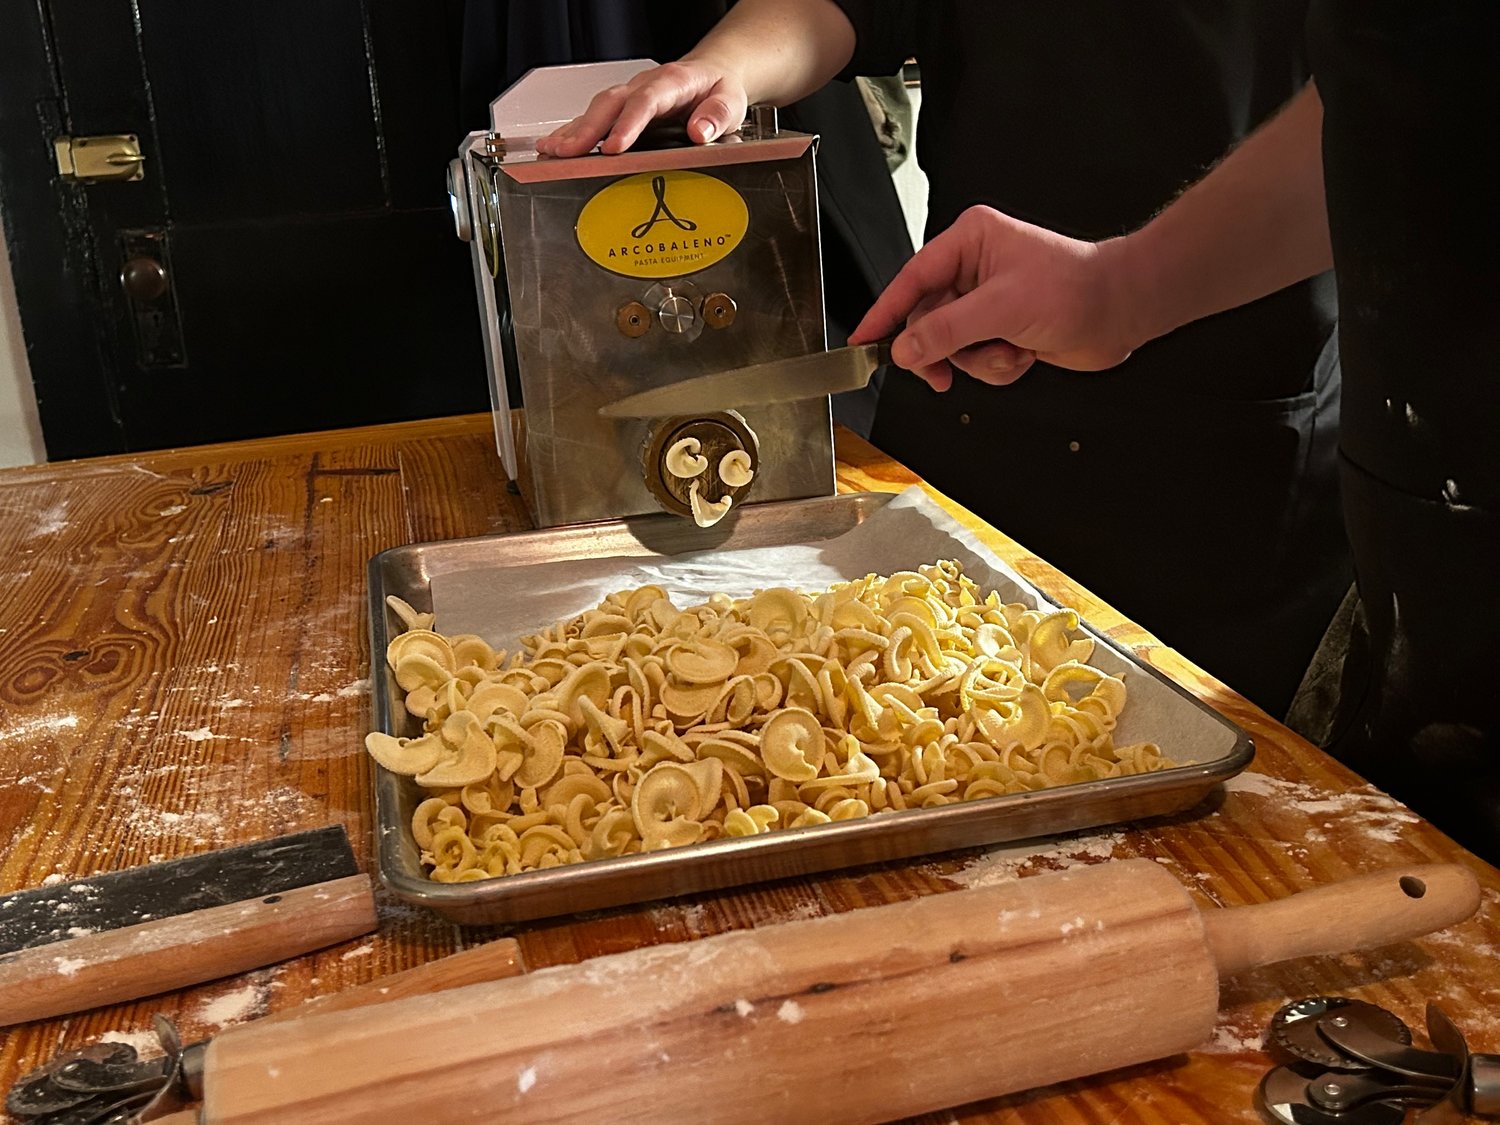 Semolina-based dough is pressed through a pasta extruder to mold the signature spiral shape of rigatoni.